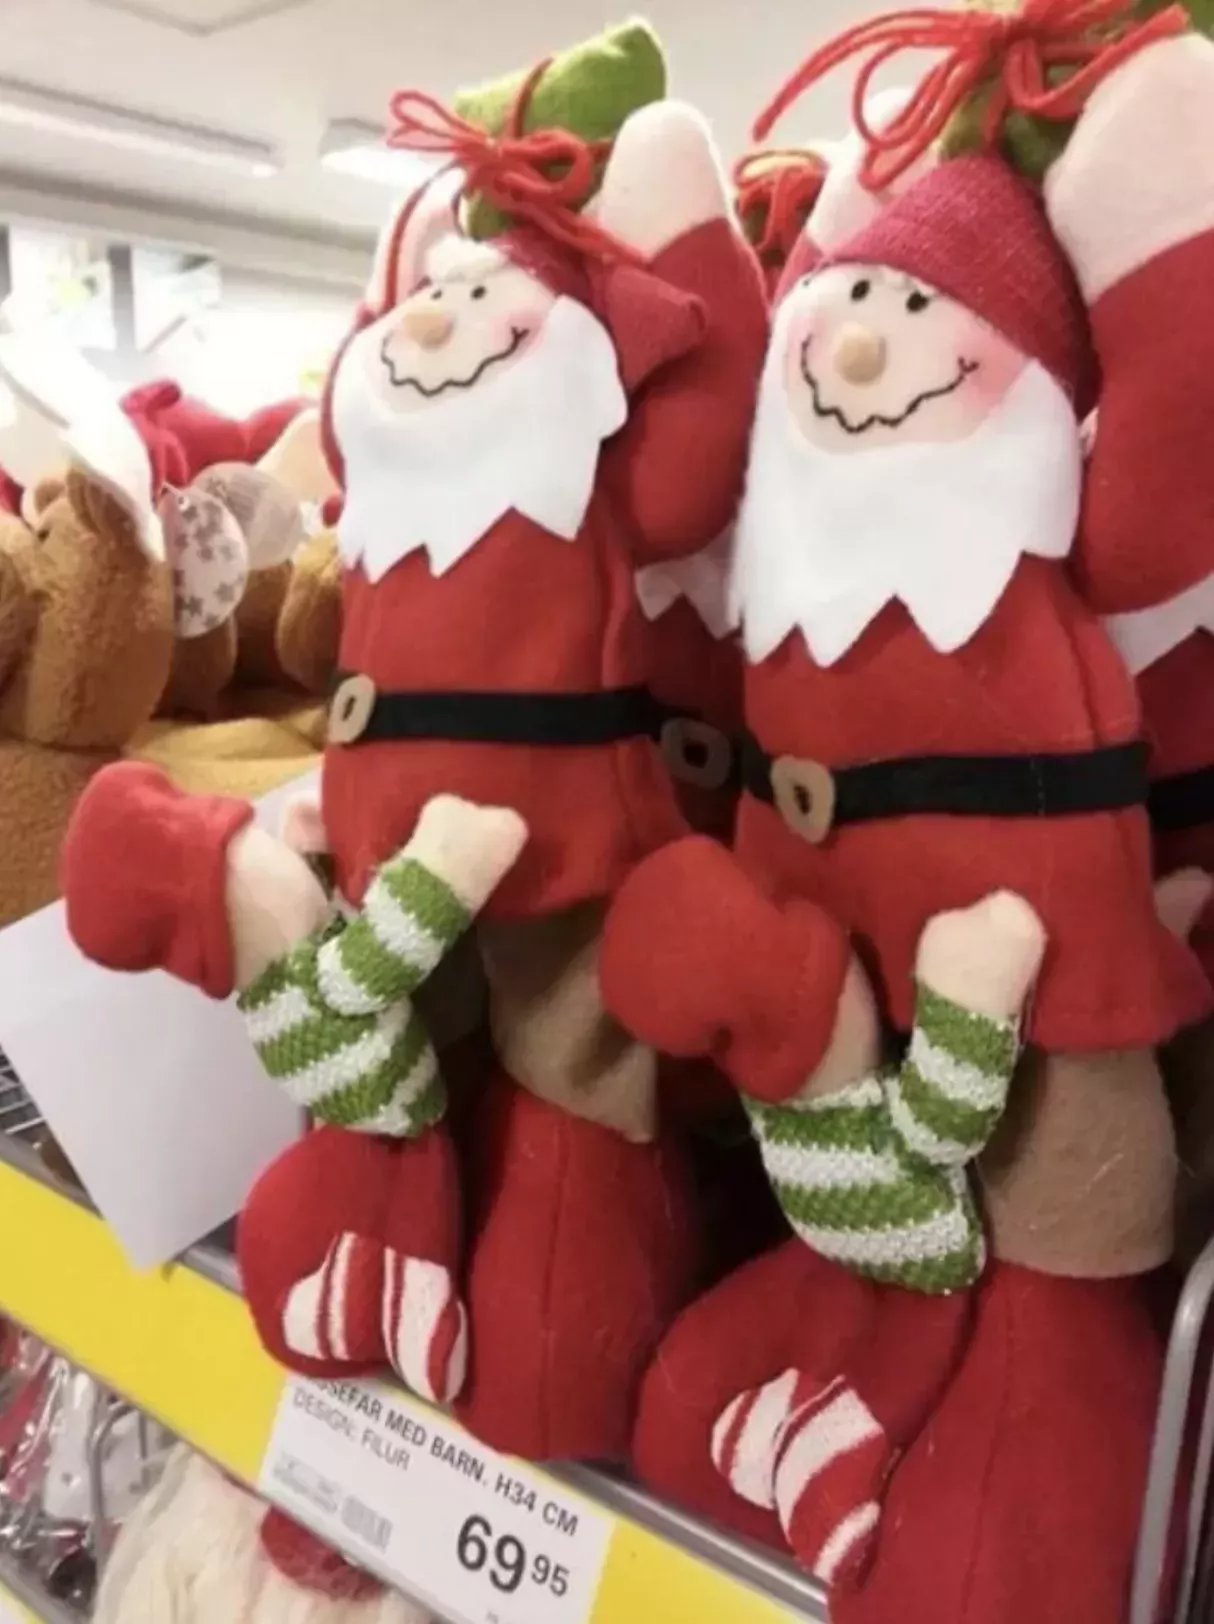 A collection of stuffed Santa decorations on the shelf at a store. The decoration features Santa with a smile holding a present above his head. Sewed to the front of his crotch, unfortunately placed between his legs, is a little child with his face buried in his crotch. The child wears a green striped shirt and candy cane striped shoes.